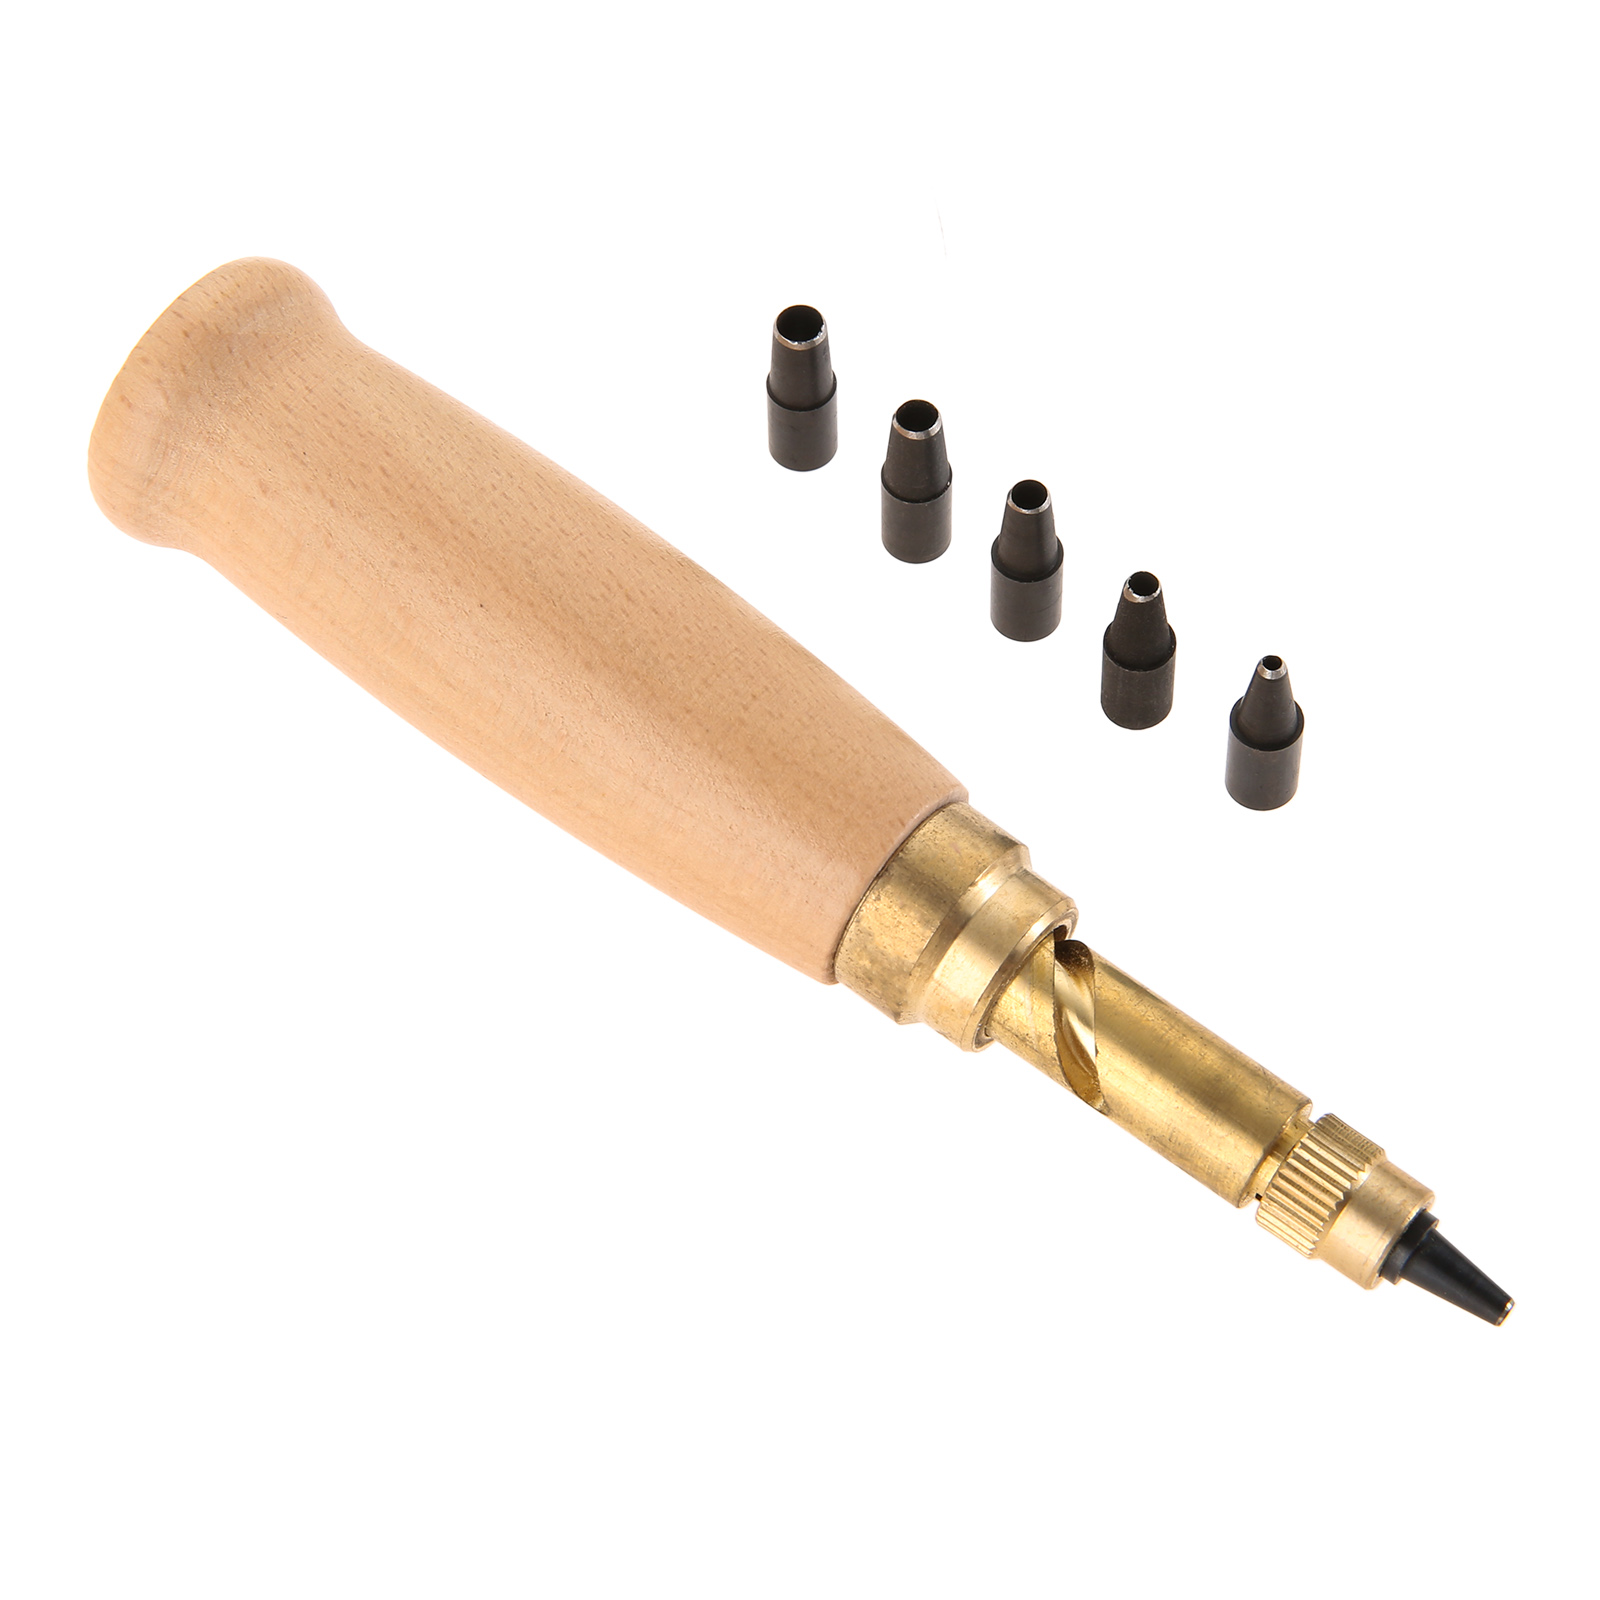 Leather Sewing Tools DIY Leather Craft Tools Hand Stitching Tool Set with Groover Awl Waxed Thread Thimble Leather Kit